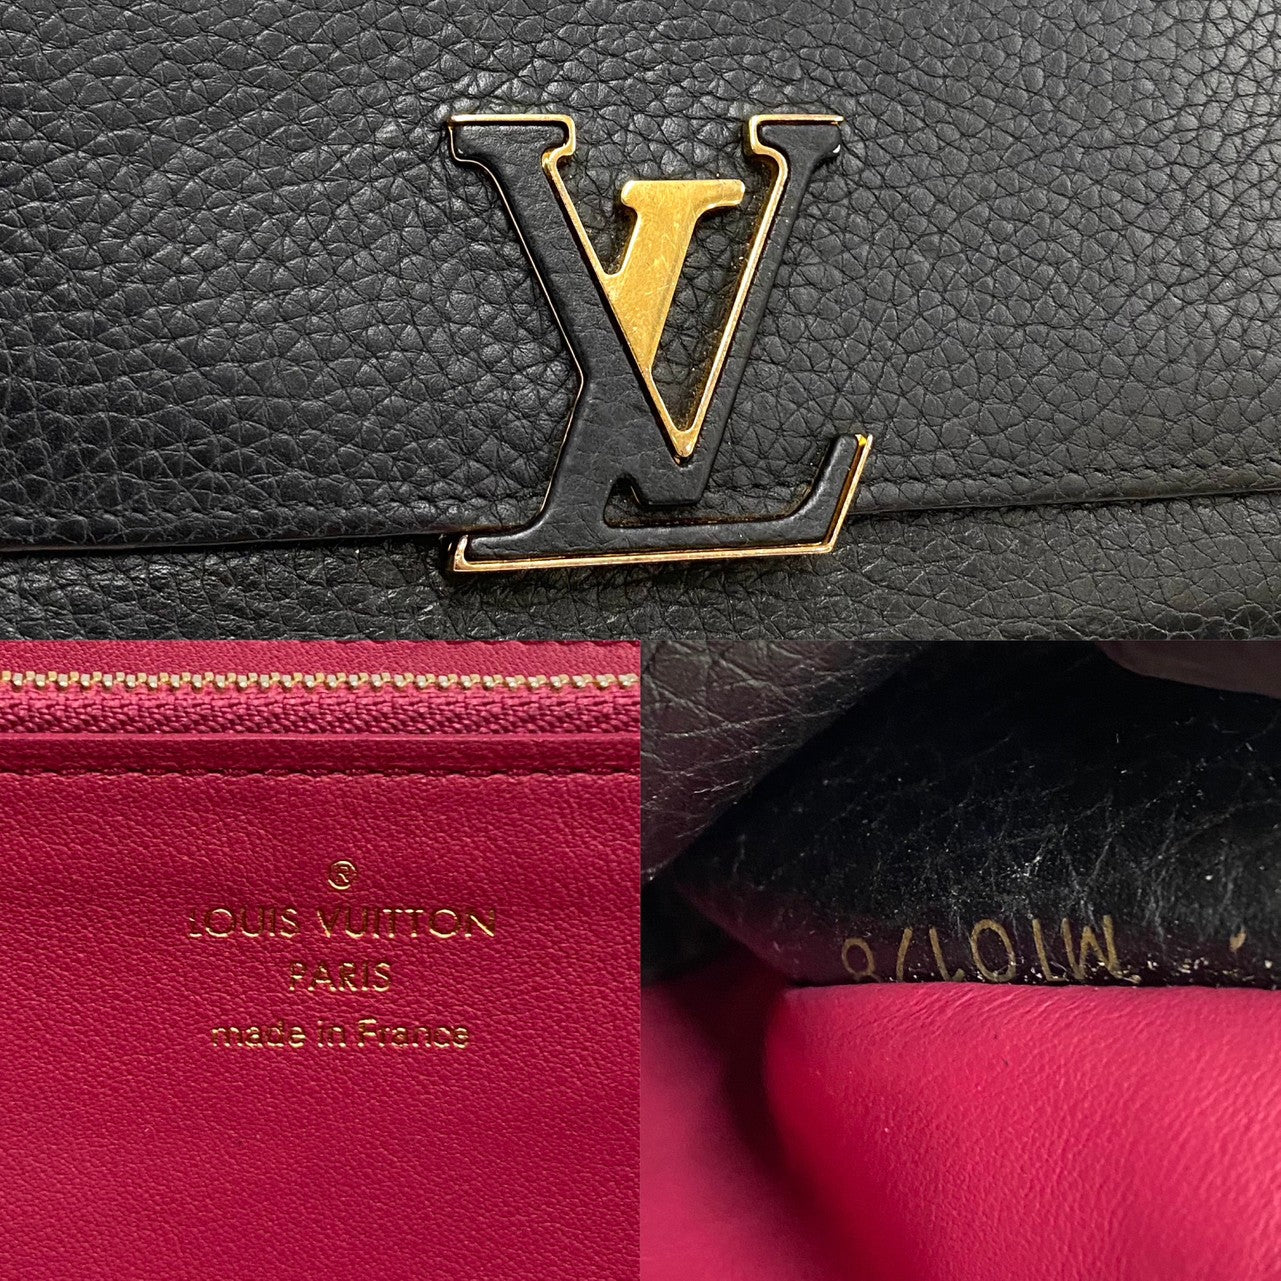 Louis Vuitton Capucines Wallet Leather Long Wallet ポルトフォイユ カプシーヌ in Good condition